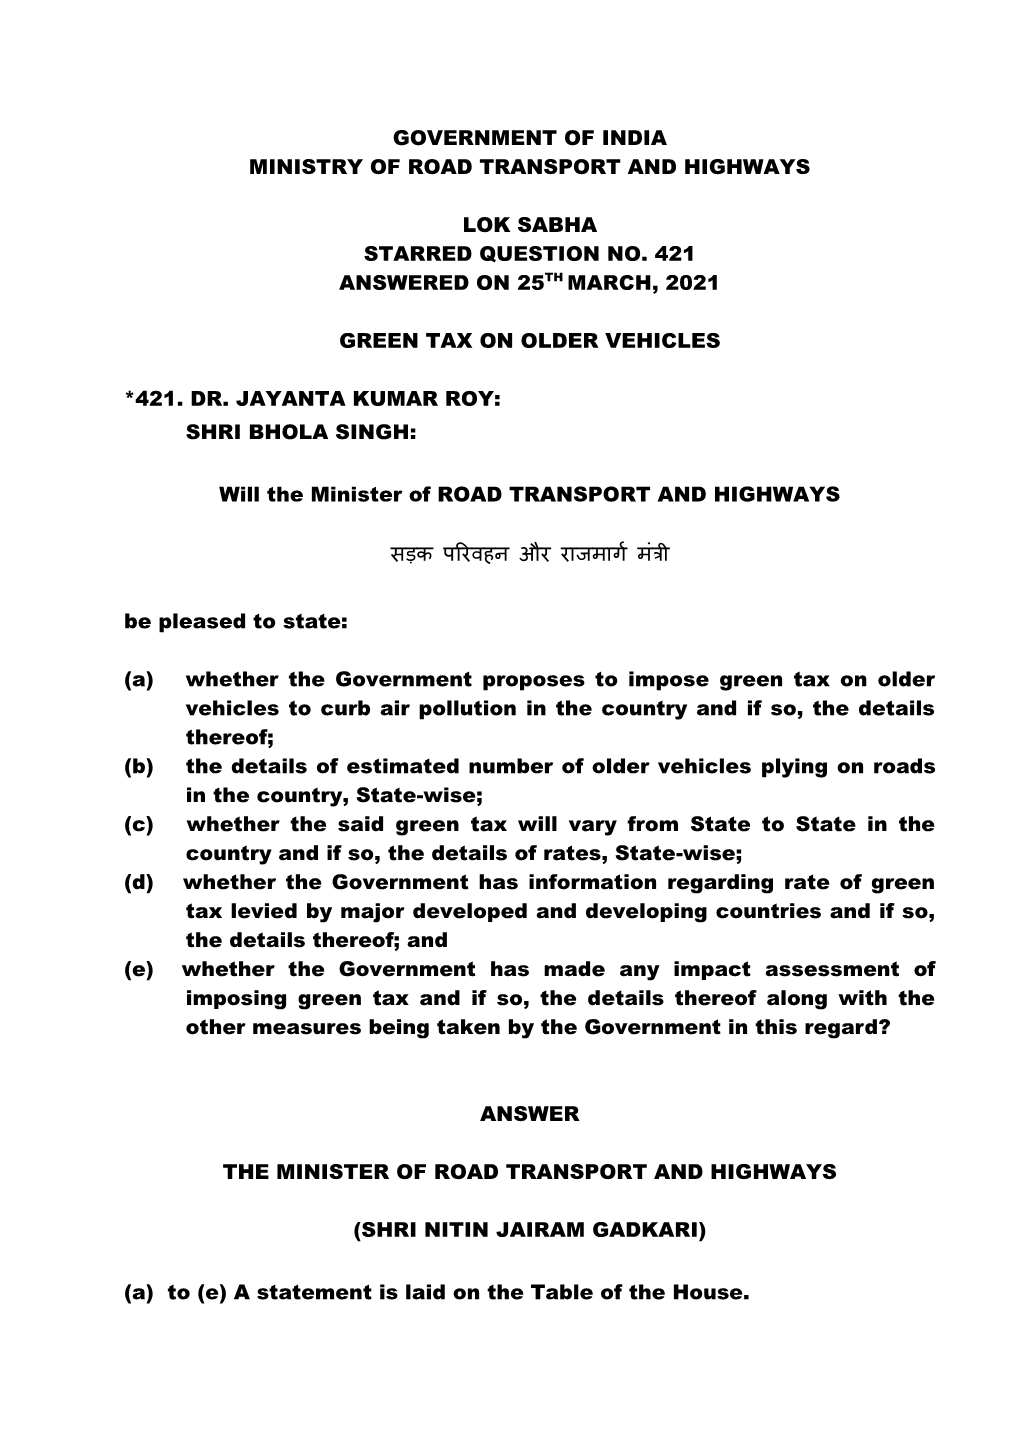 Government of India Ministry of Road Transport and Highways